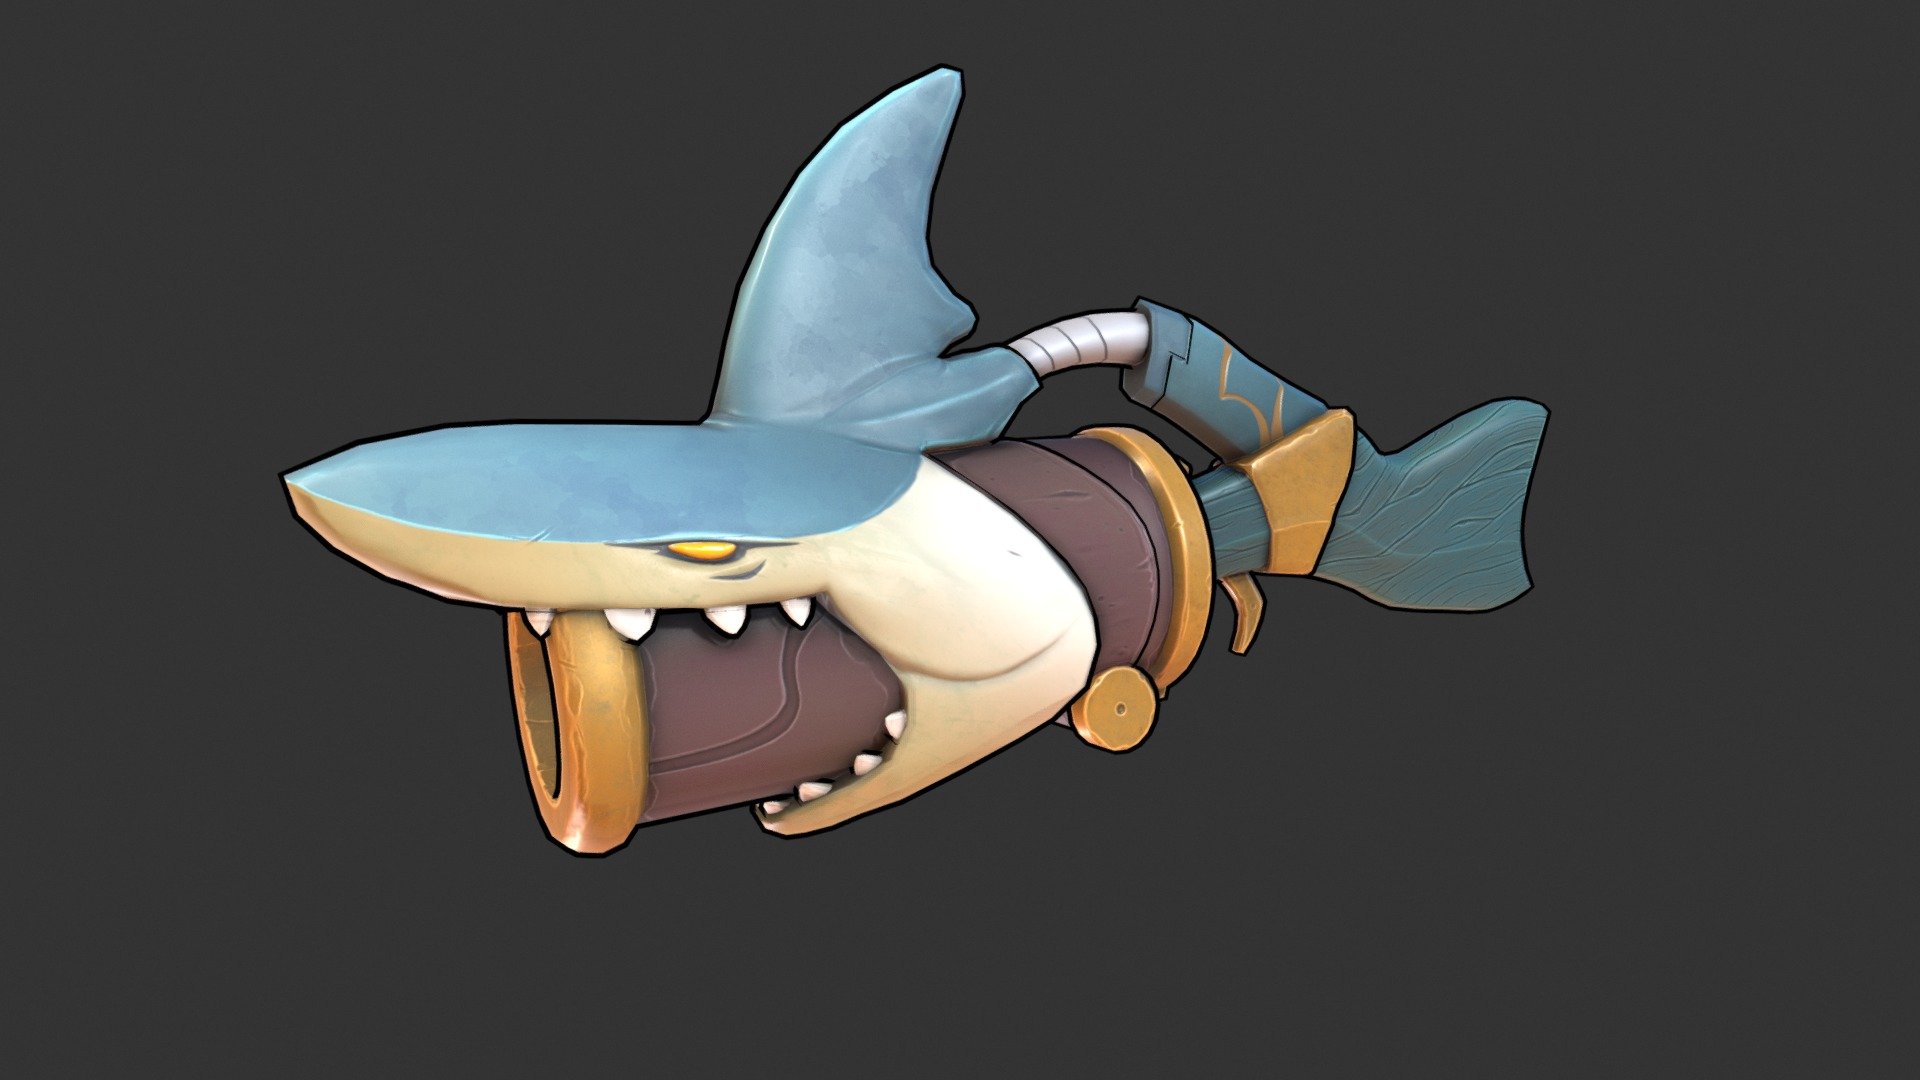 Stylized shark gun based on the awesome concept of:

Olivier Désirée

here is the concept:
https://www.instagram.com/p/CCiUOnZjU5K/
PIRATES! - Shark Gun - Buy Royalty Free 3D model by Reset (@Reset6) 3d model